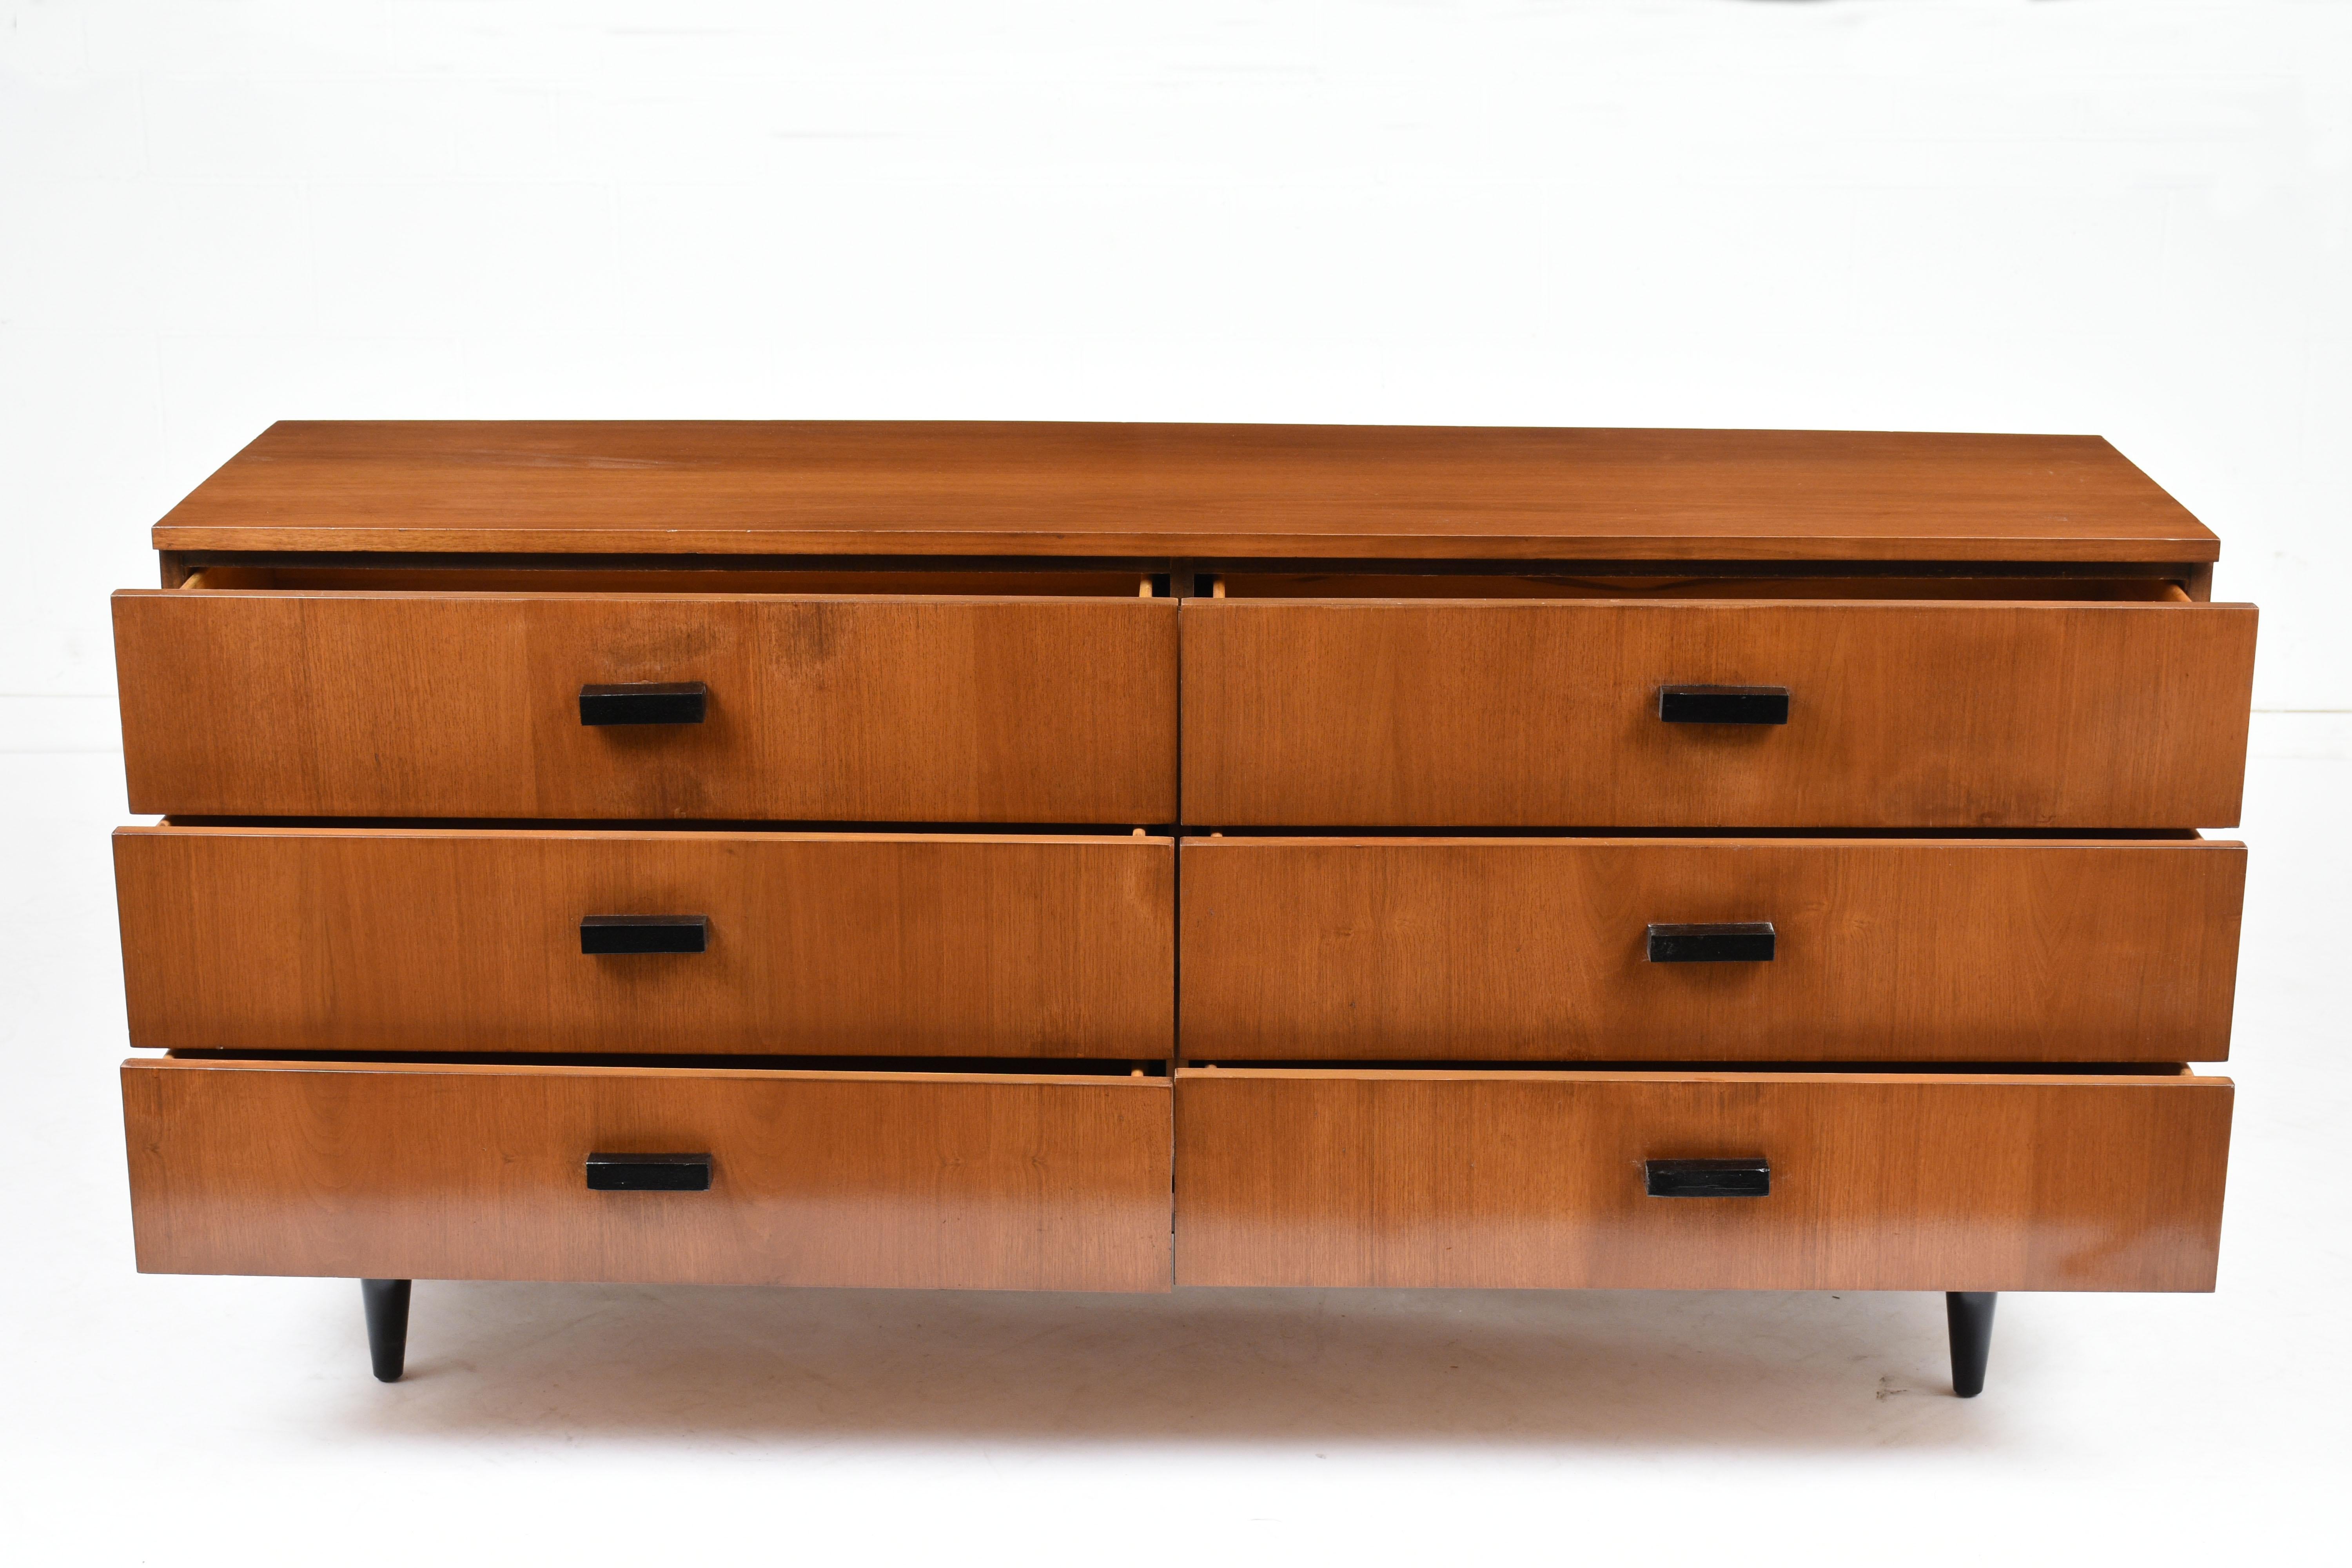 Carved Mid-Century Modern Style Chest of Drawers